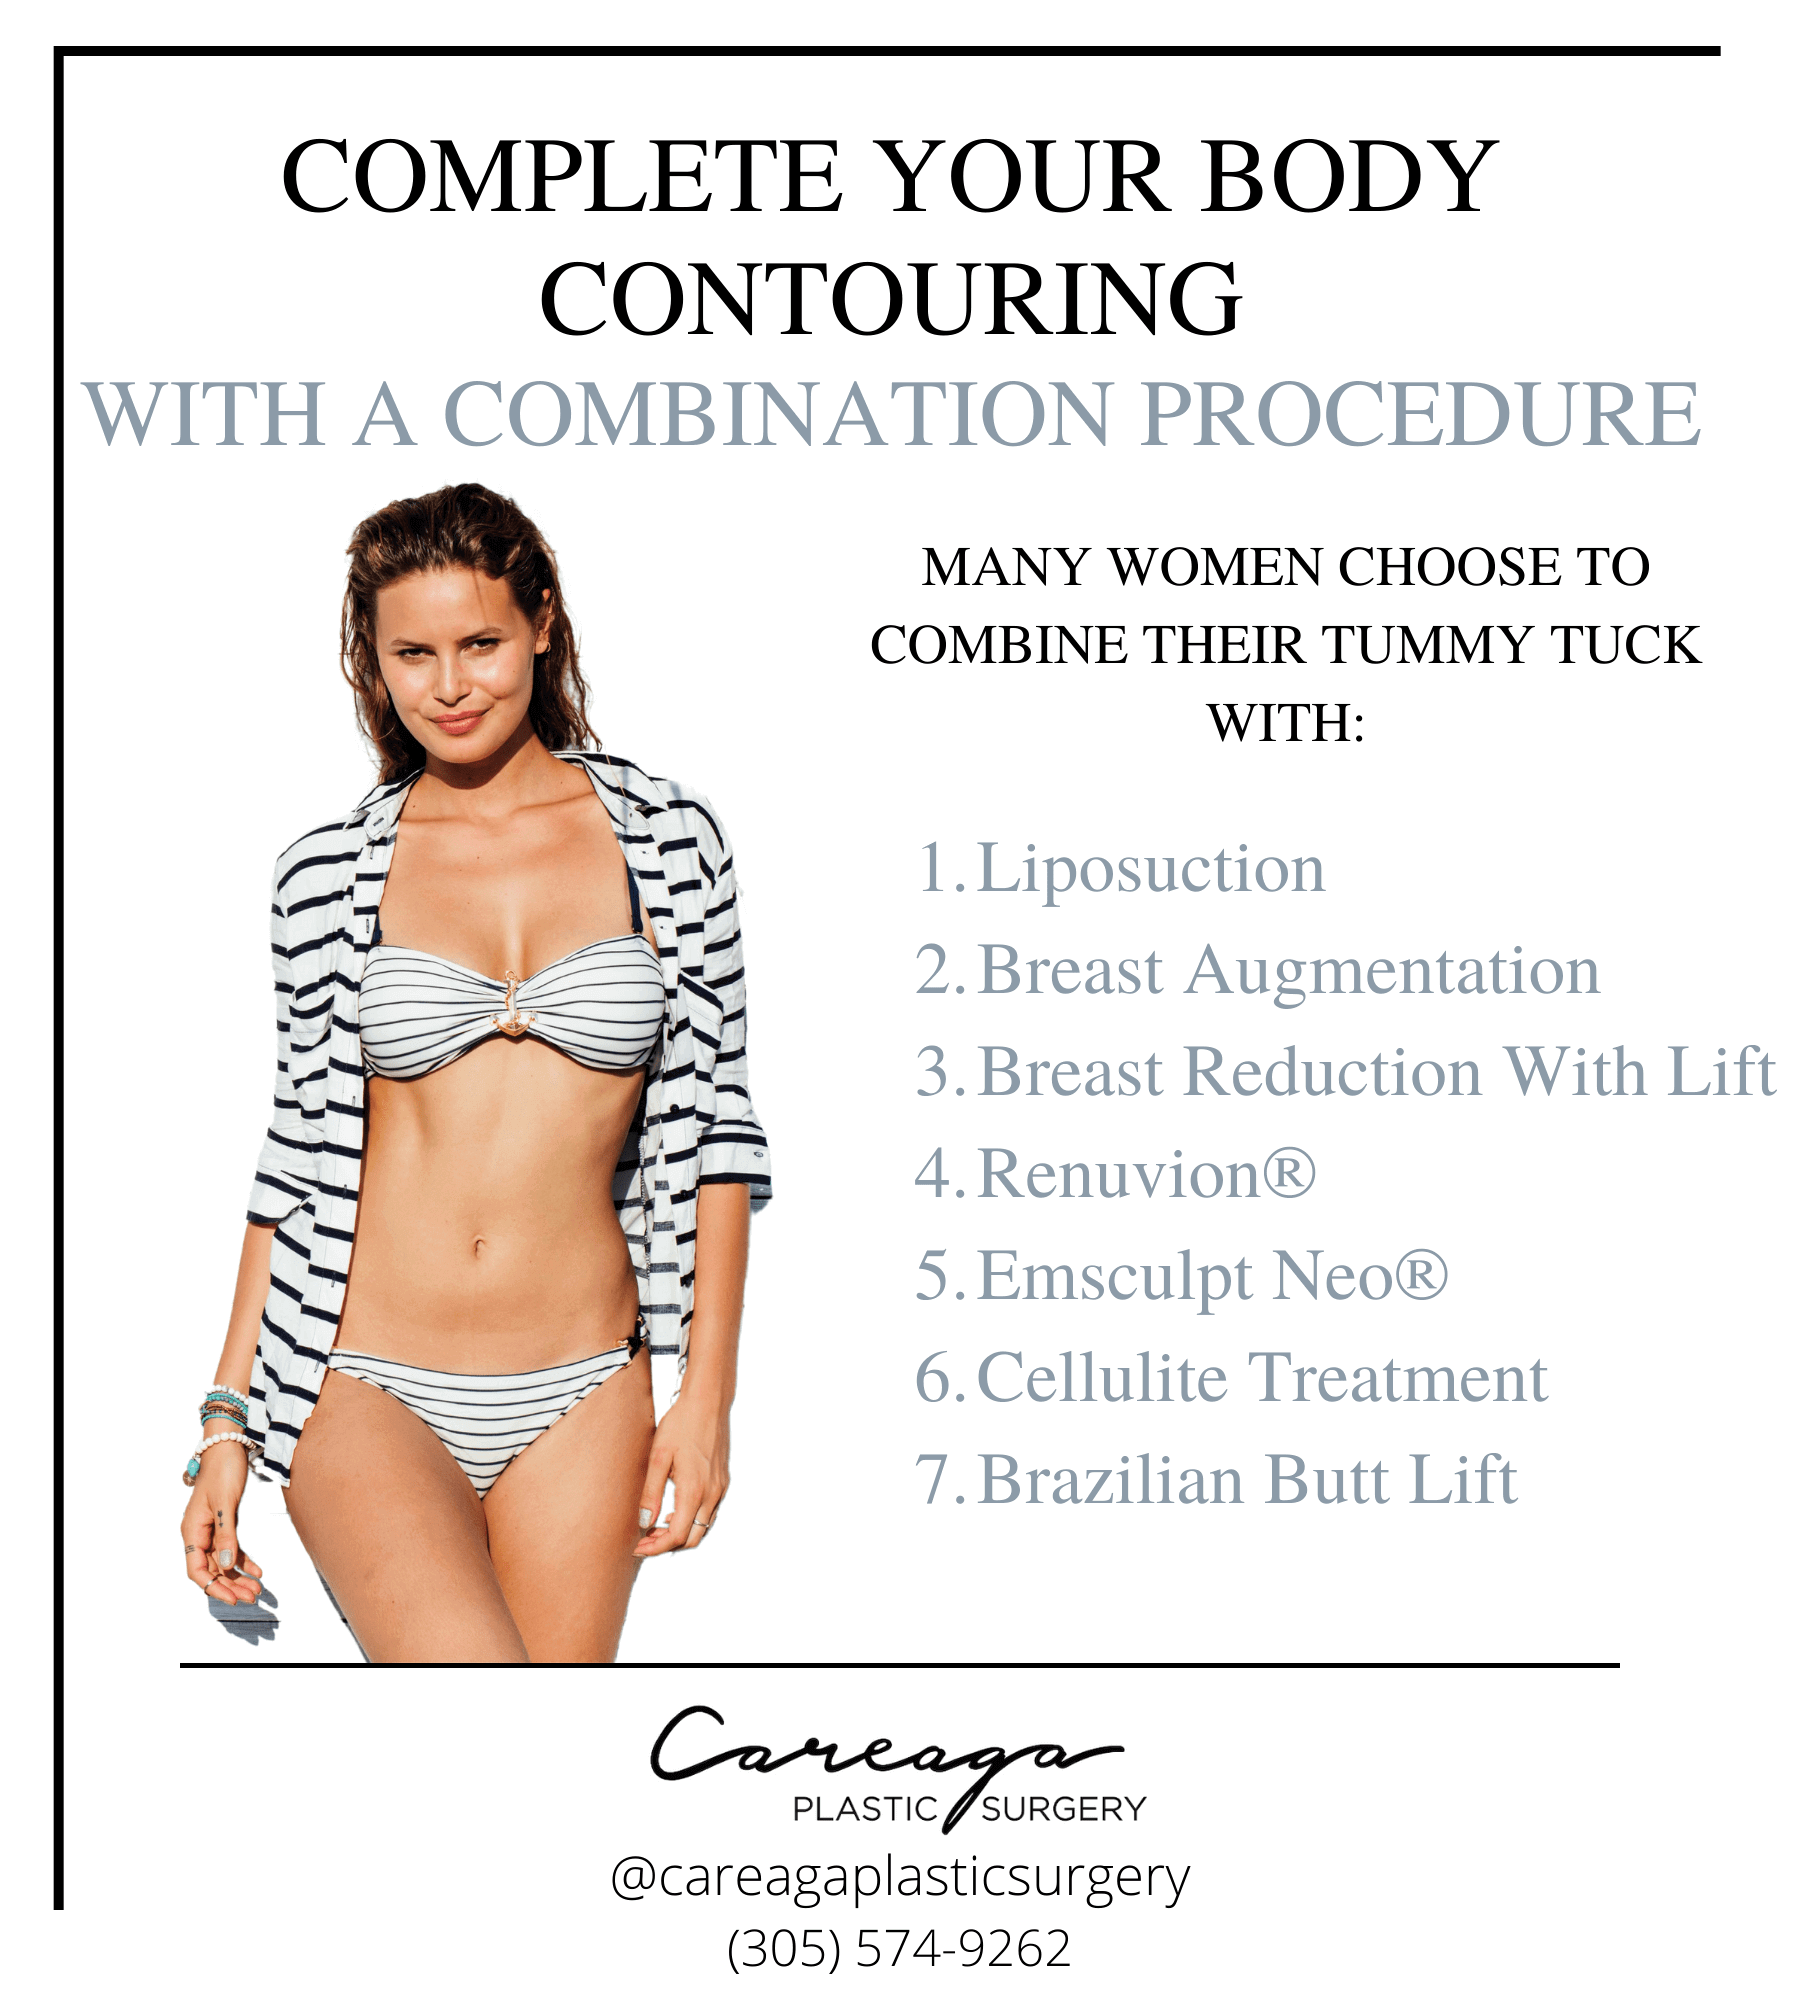 Infographic showing the procedures you can combine with tummy tuck surgery to enhance results